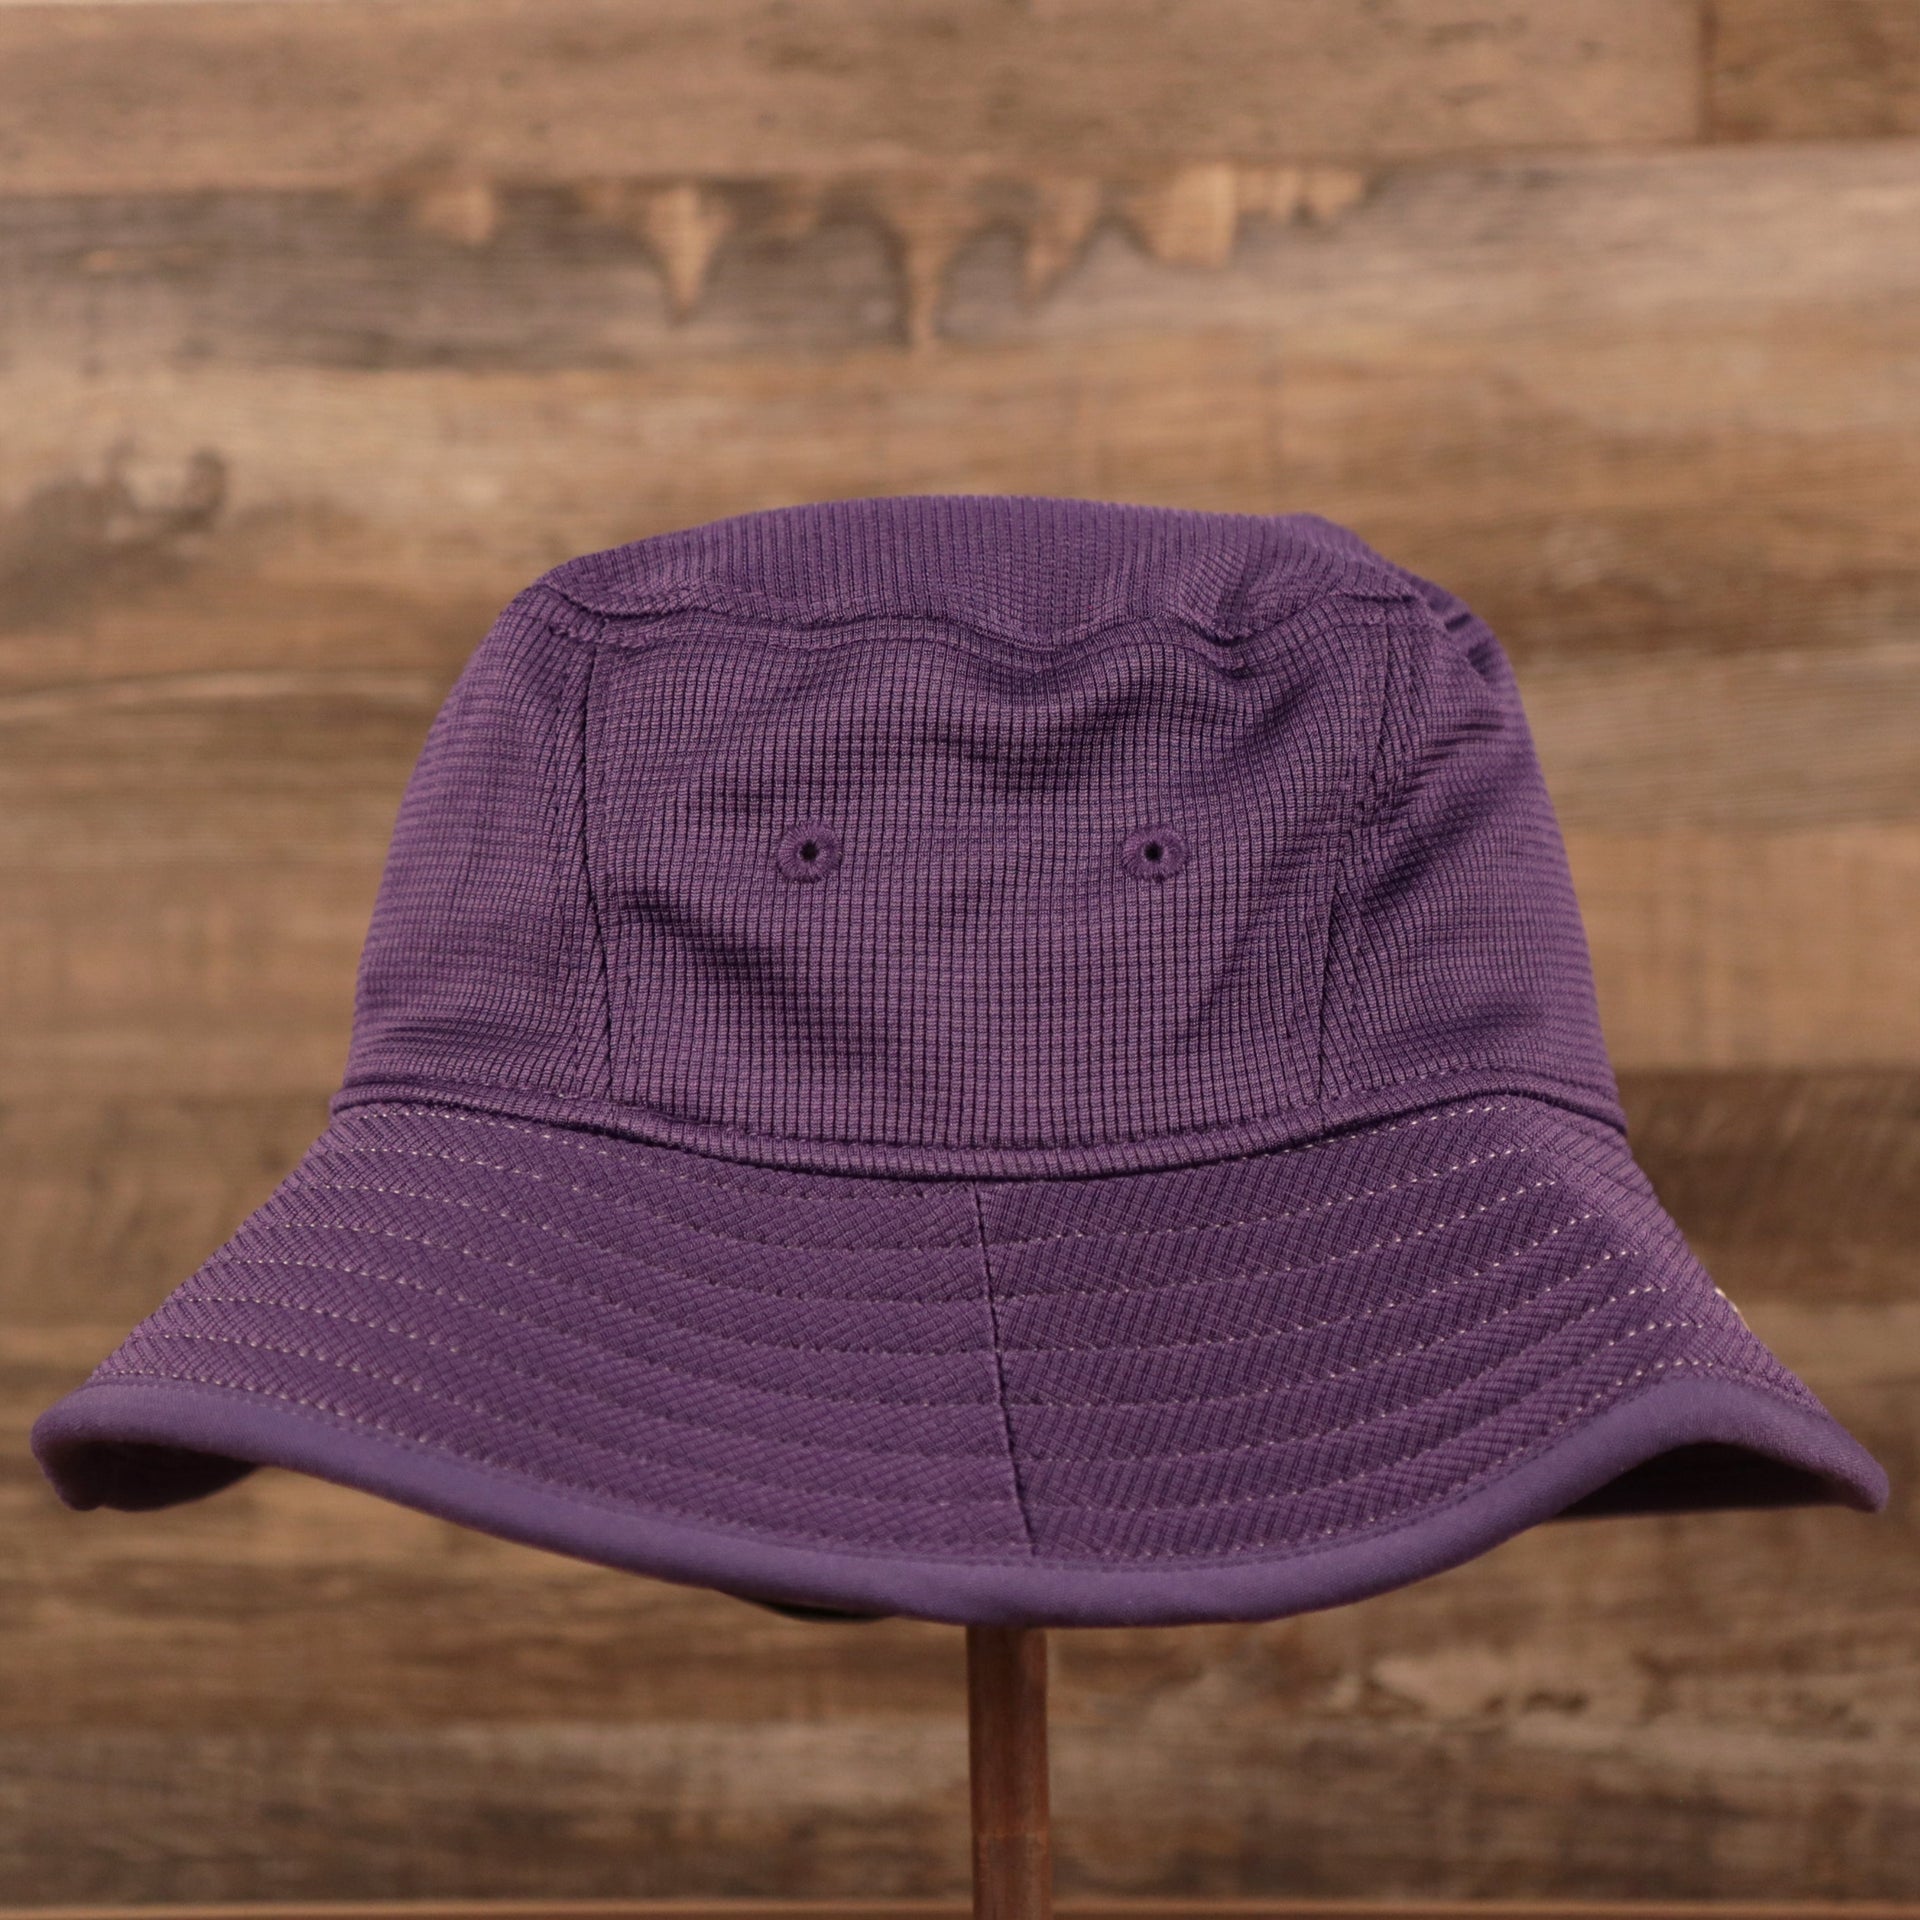 The Los Angeles Lakers purple fishing hat by New Era.